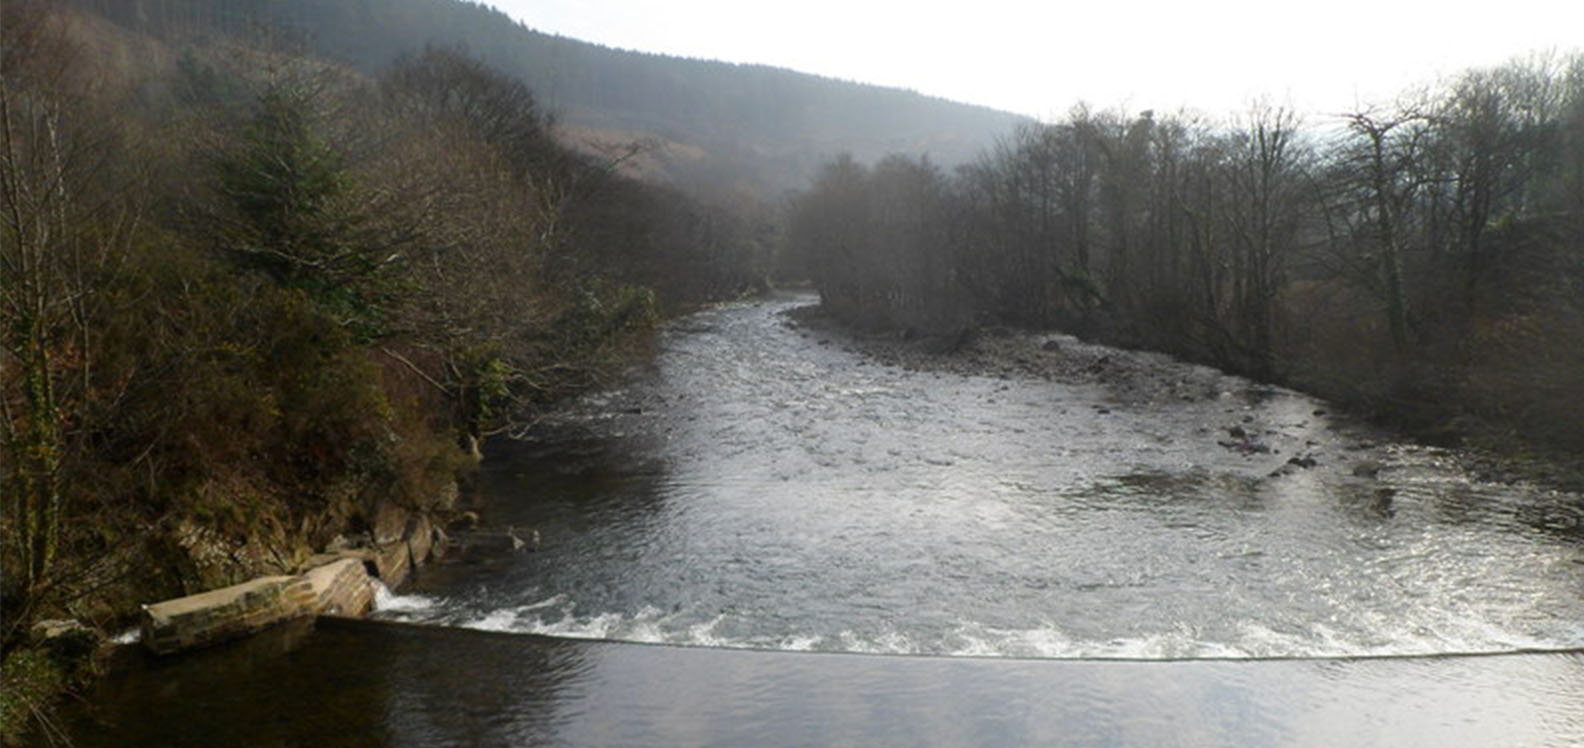 The weir across the River Afan in Cwmavon